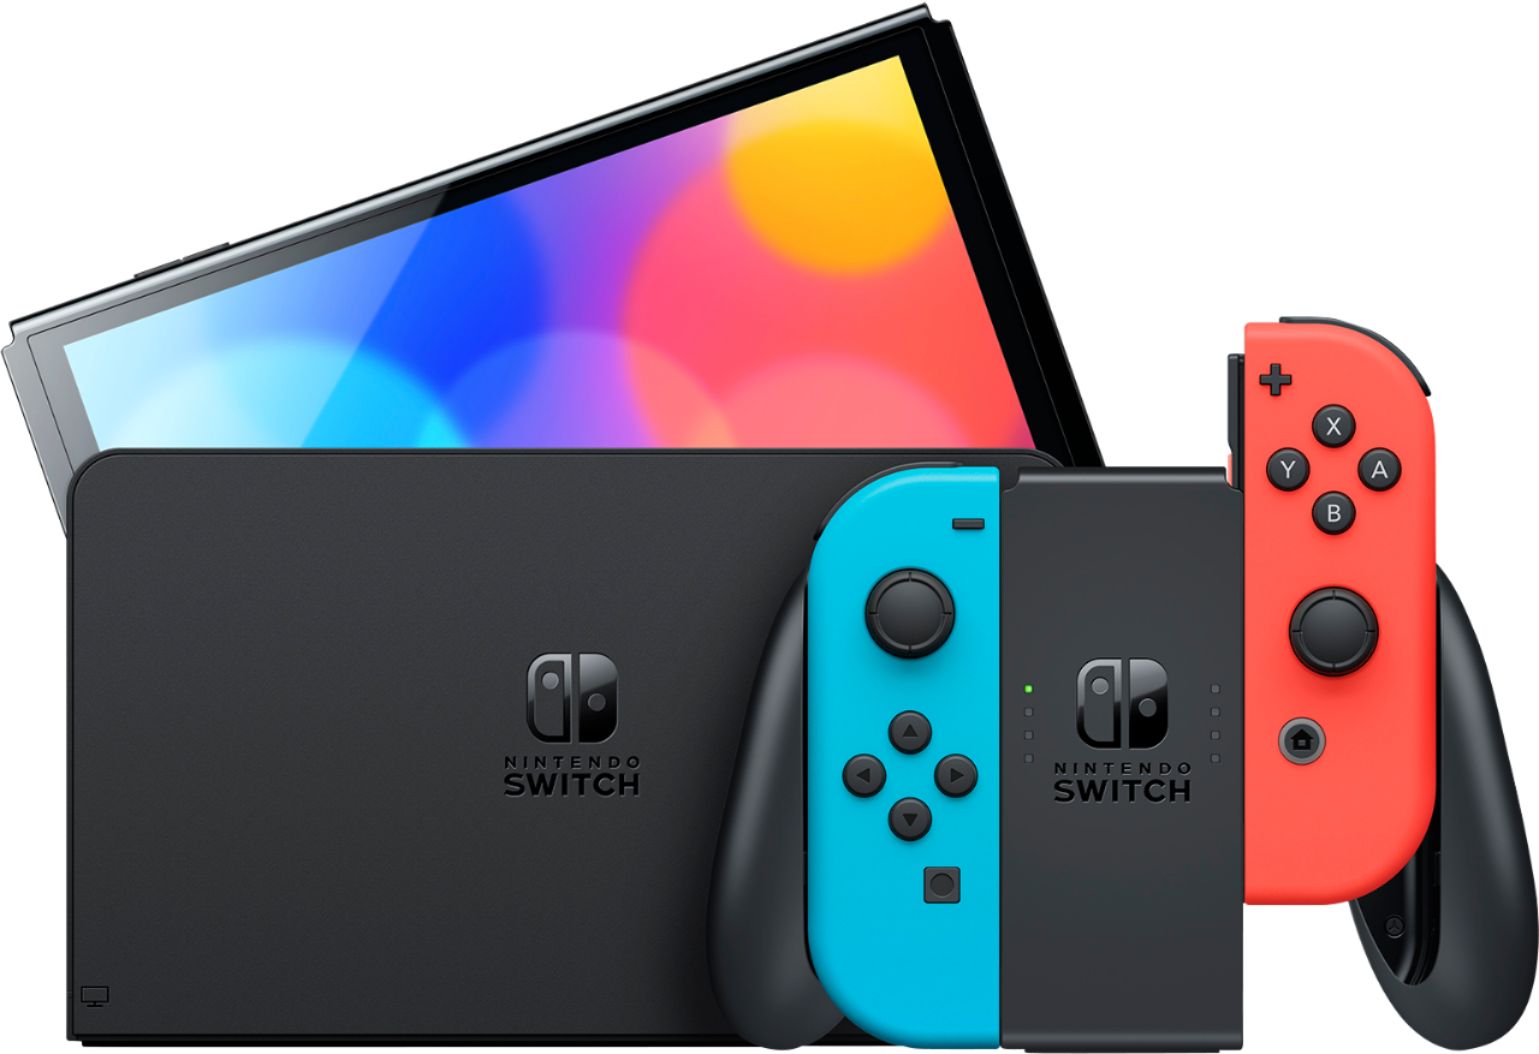 2021 New Nintendo Switch OLED Model Neon Red & Blue Joy Con 64GB Console HD Screen & LAN-Port Dock with Fitness Boxing 2: Rhythm & Exercise And Mytrix Joystick Caps & Screen Protector